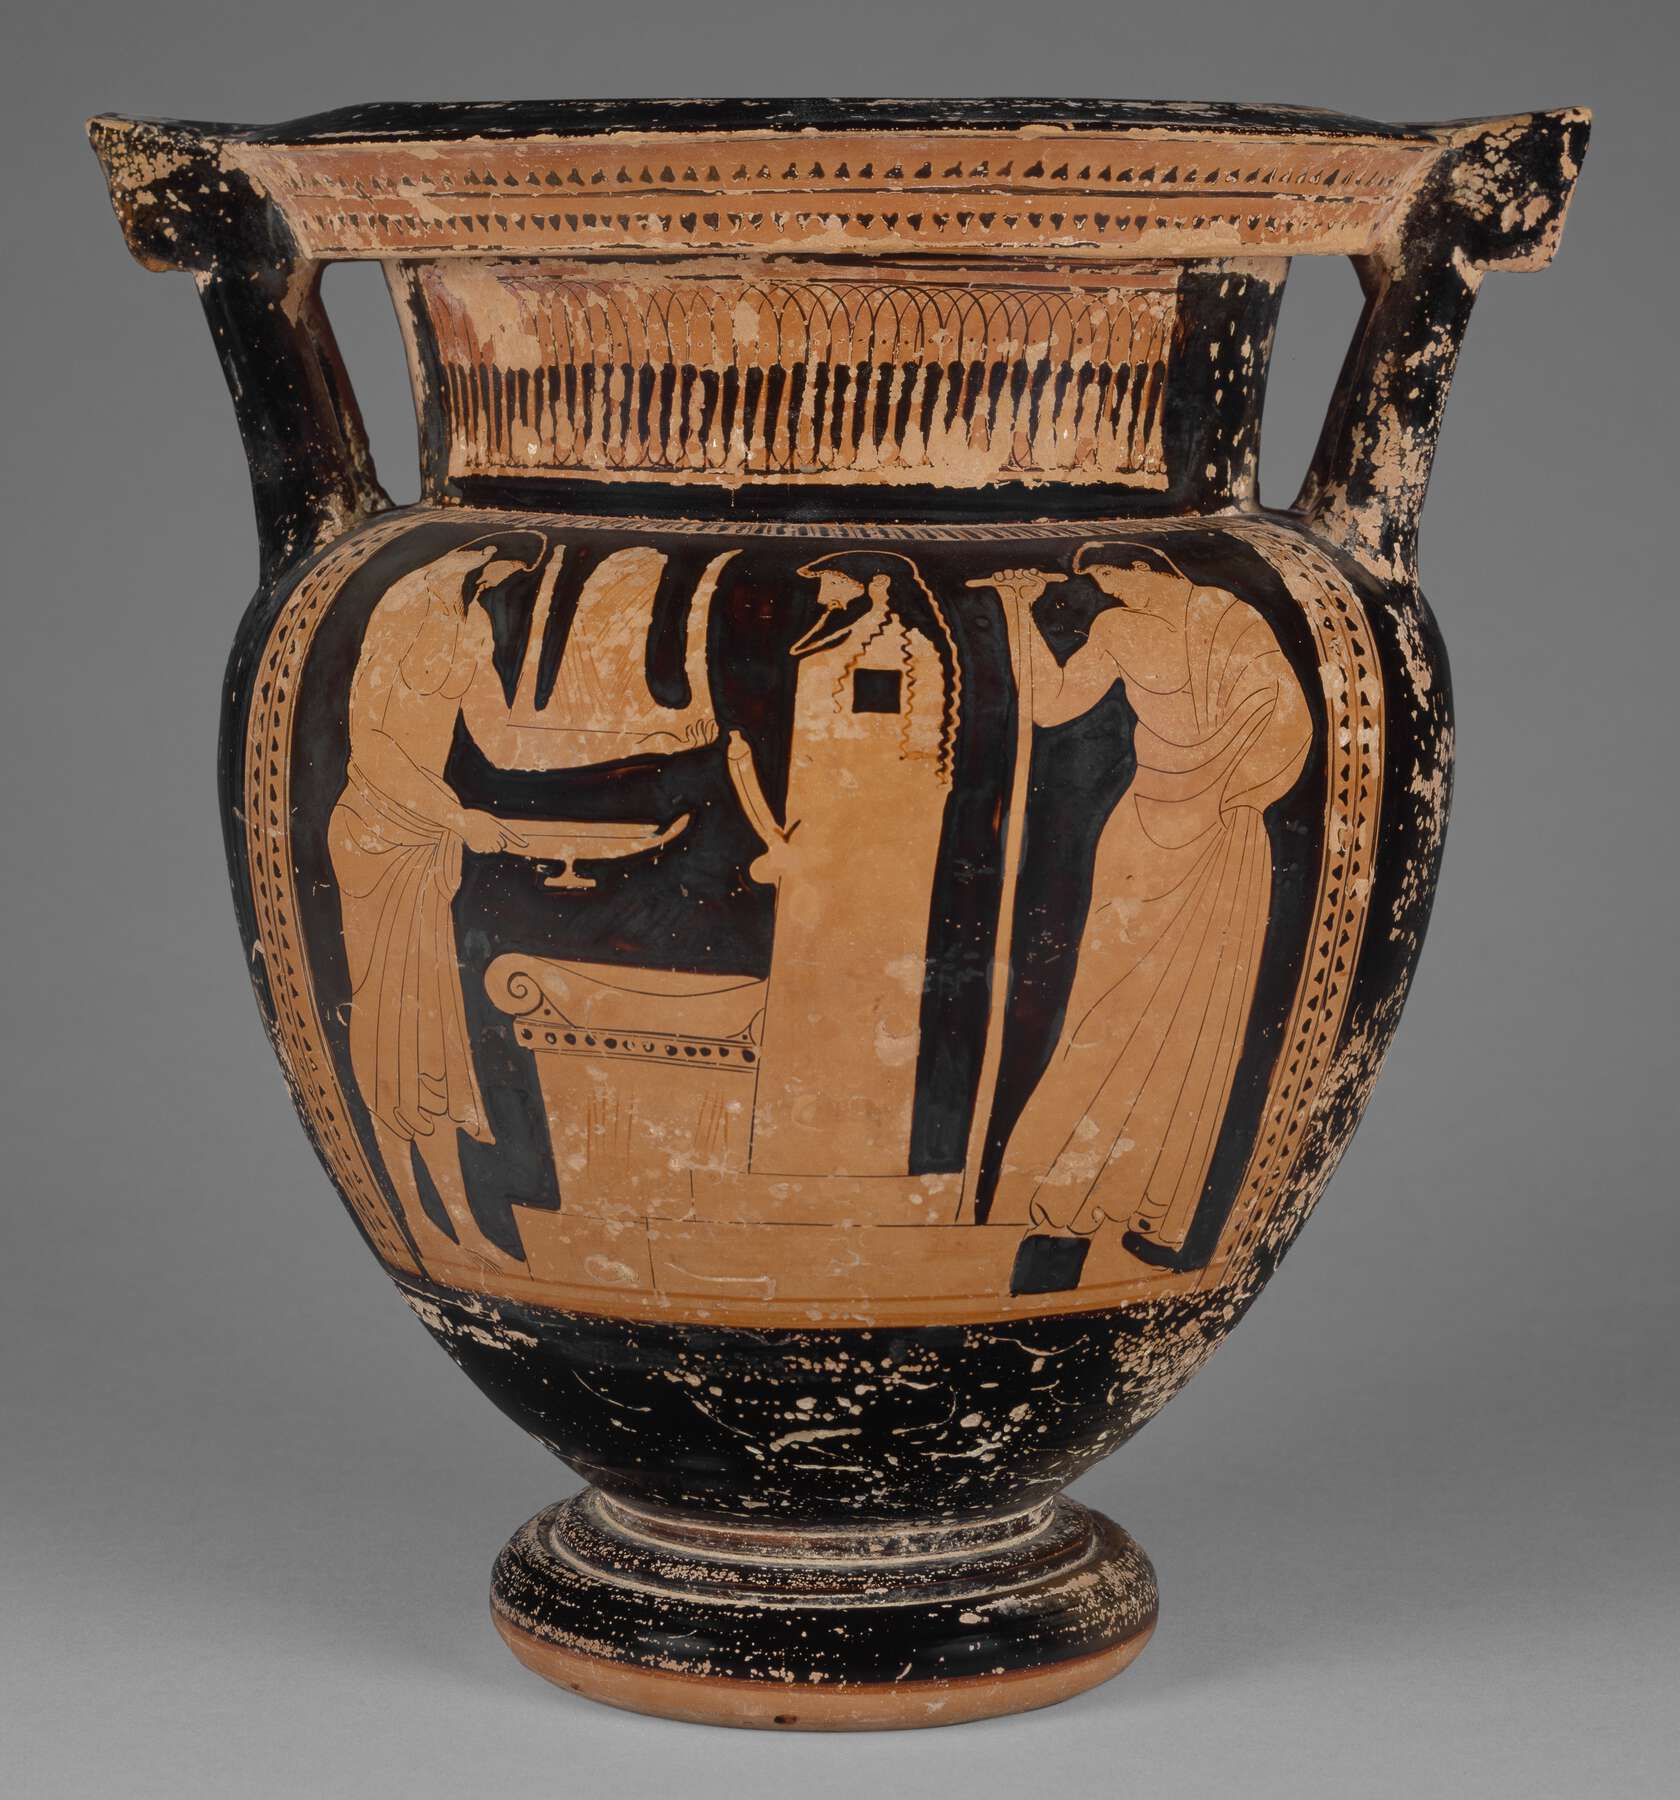 One view of a vase, the body showing three people, two of them holding things, standing next to a larger object